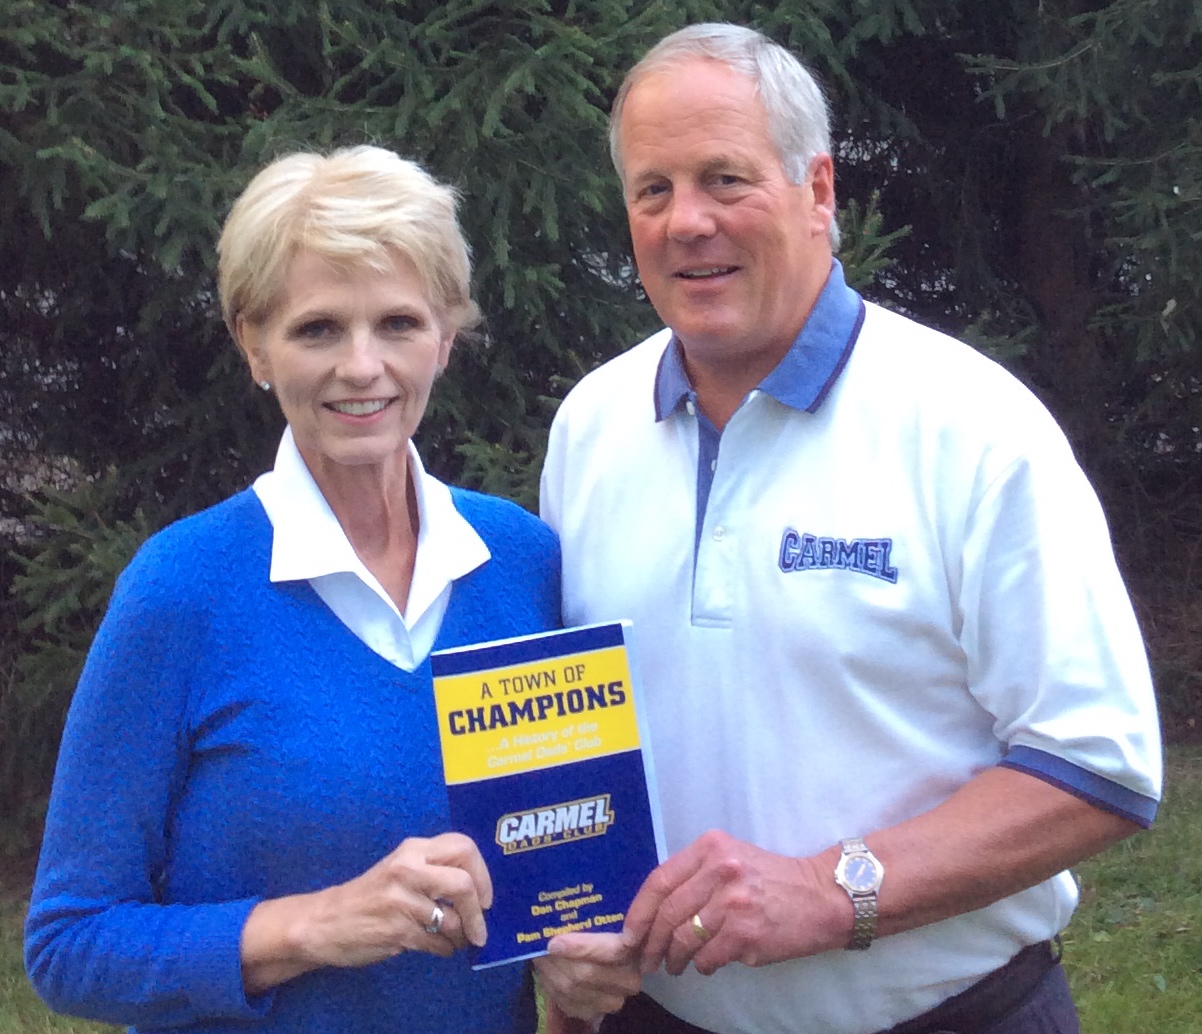 Pam Shepherd Otten and Dan Chapman with their new book on Carmel Dads Club. 